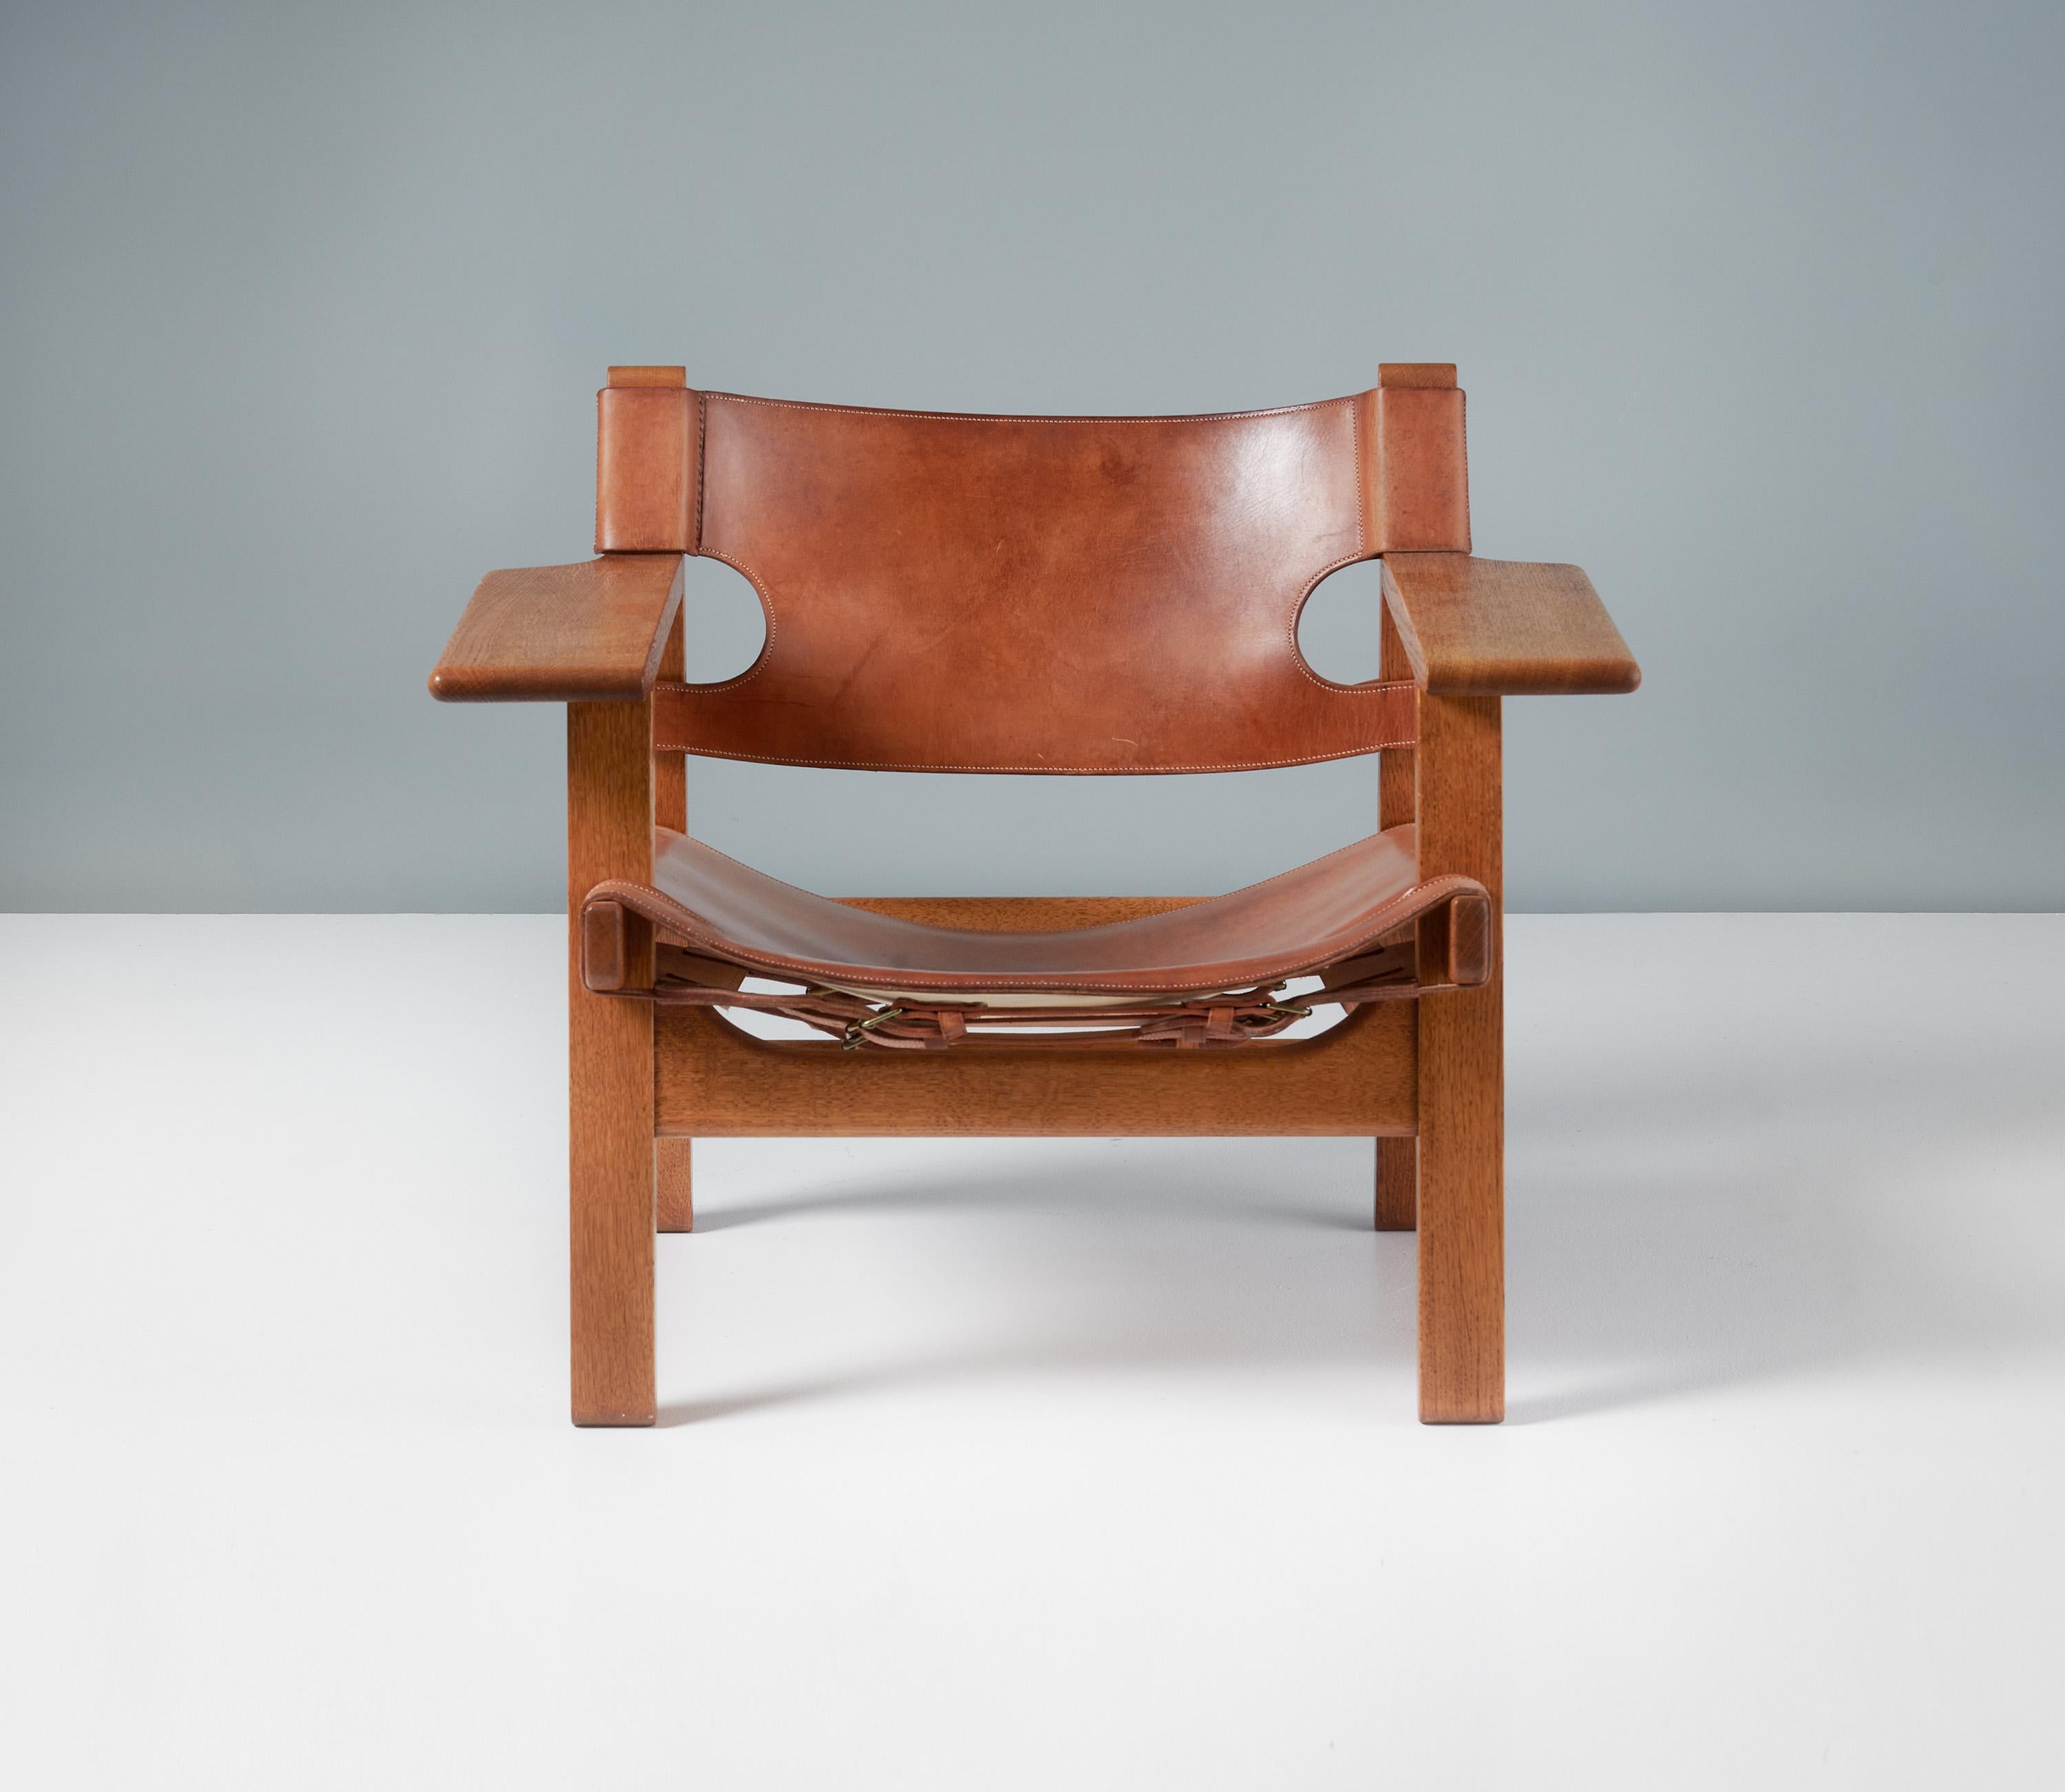 Børge Mogensen - The Spanish Chair, c1958

Manufactured by Fredericia Stolefabrik, Copenhagen, Denmark. Beautifully patinated and aged oak frame with original, patinated tan saddle leather seat and back and brass fittings. This wonderful early